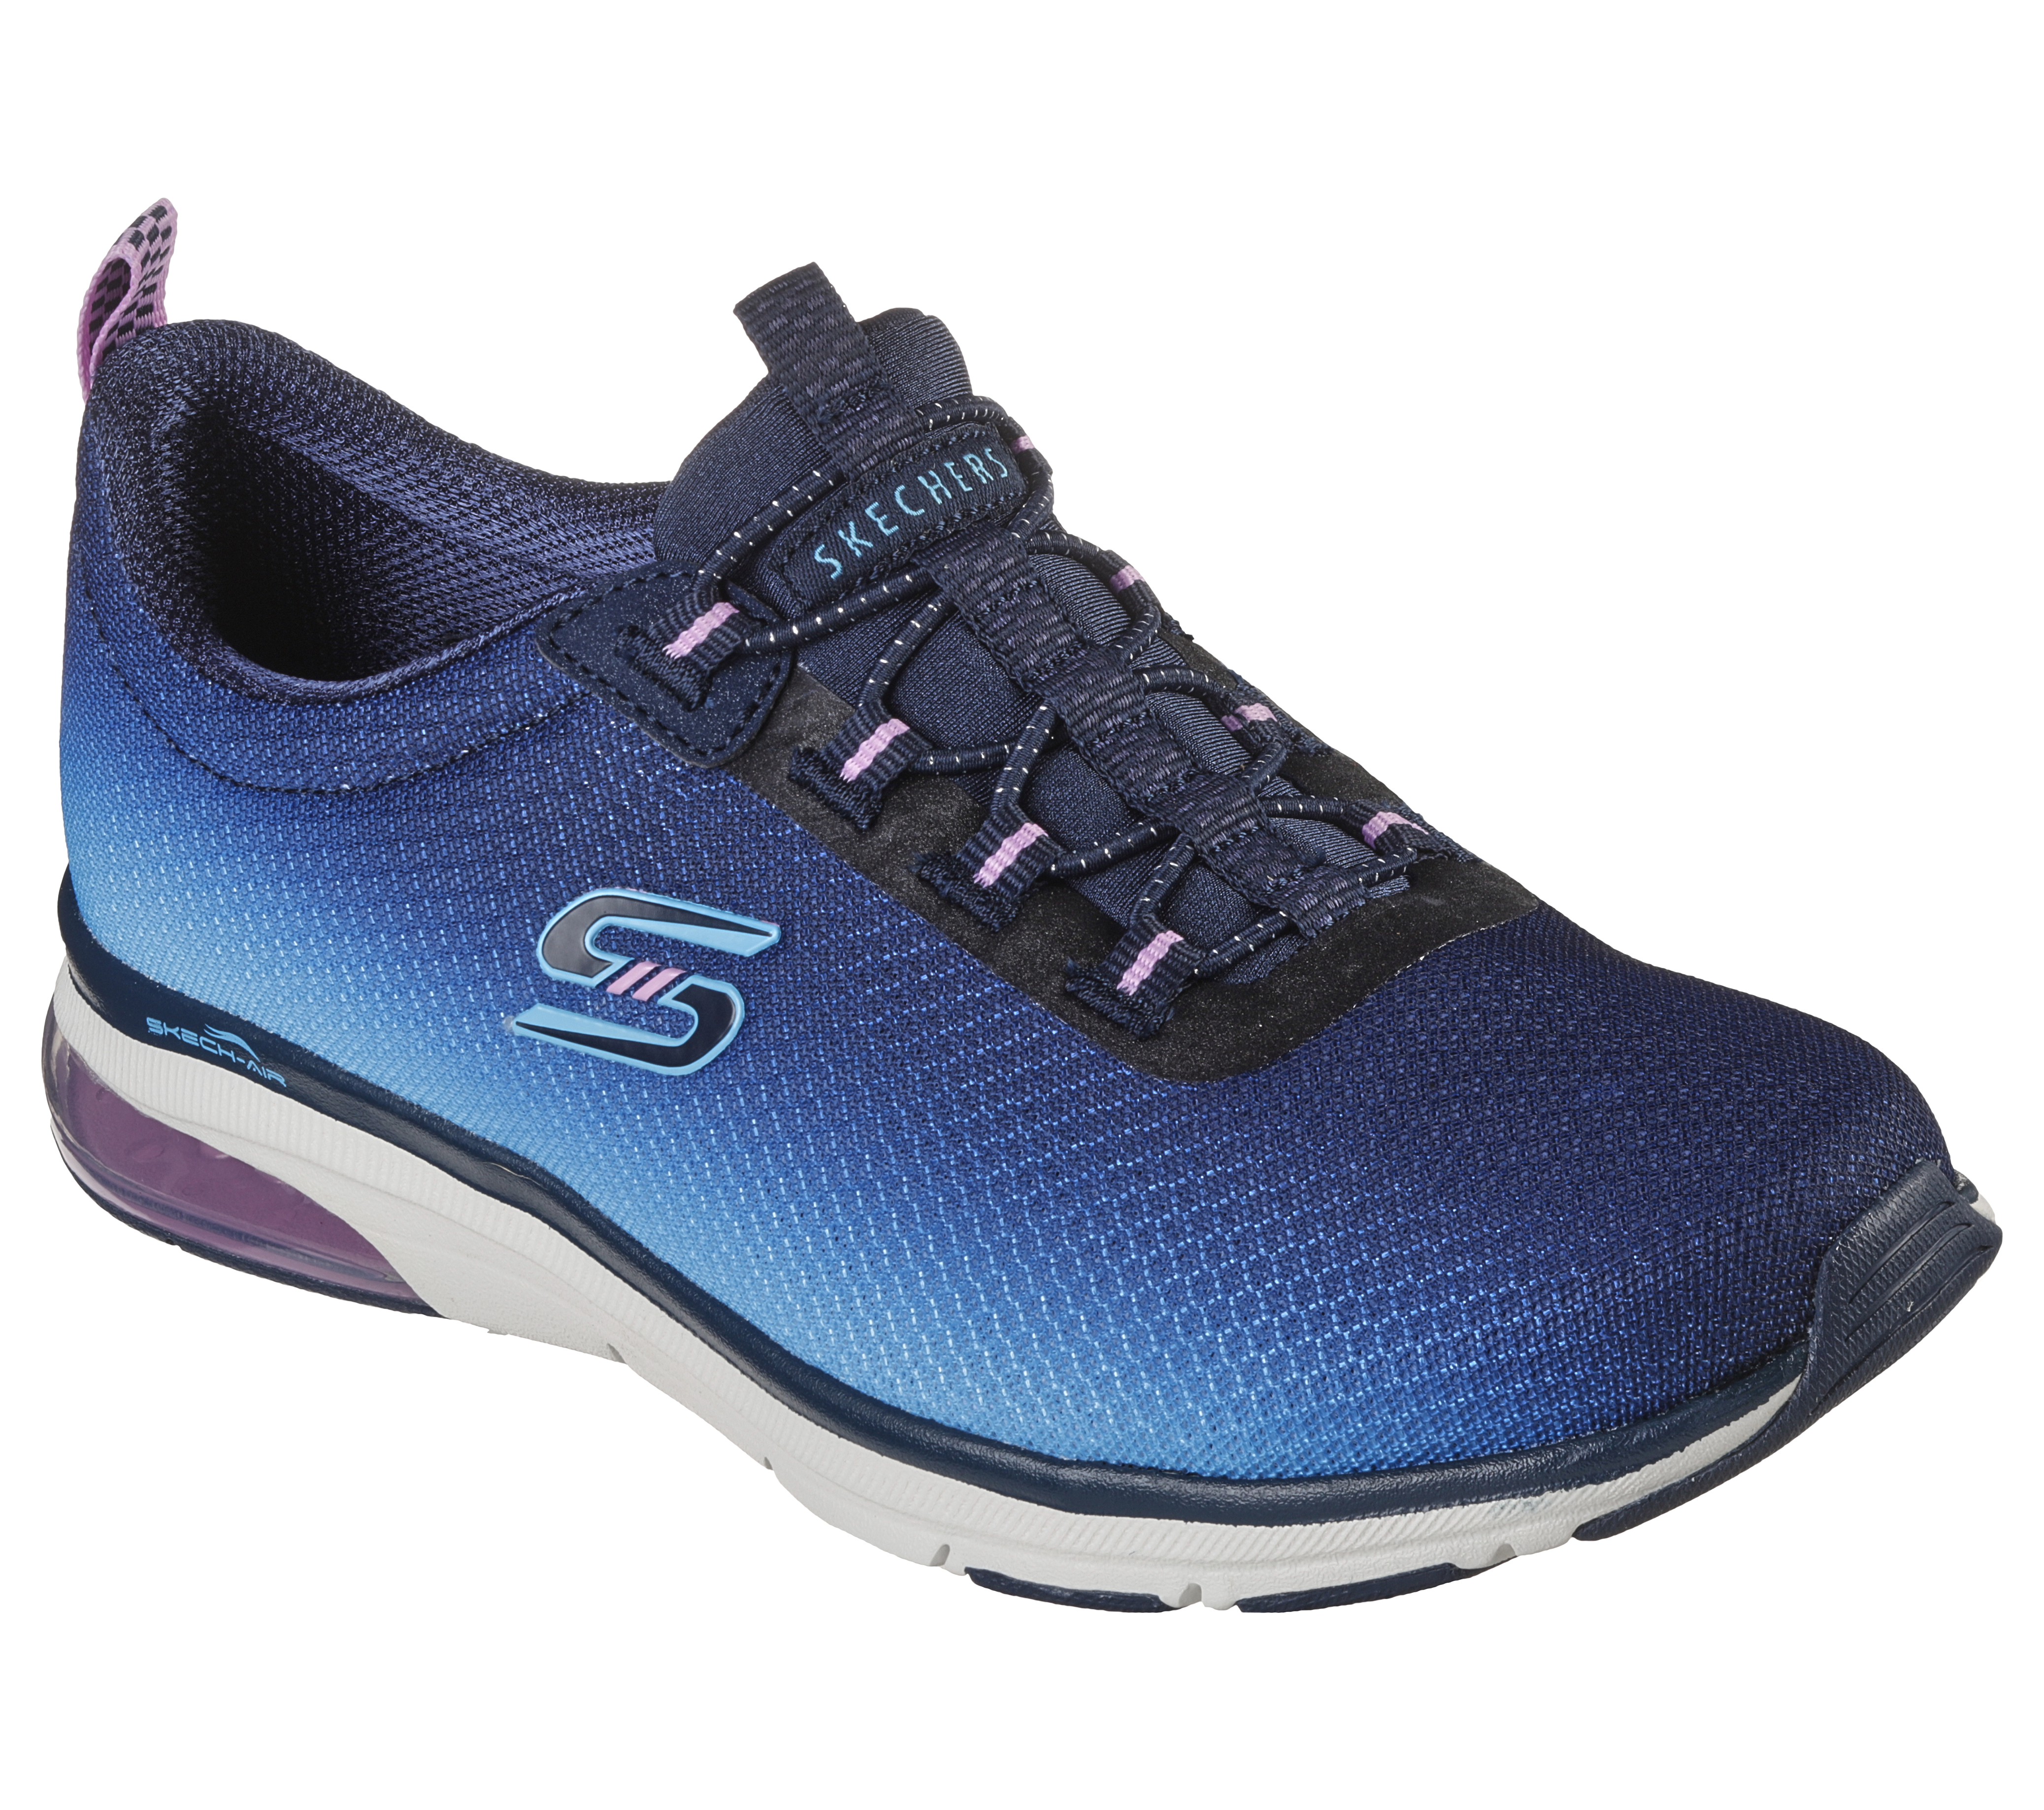 the new skechers with memory foam